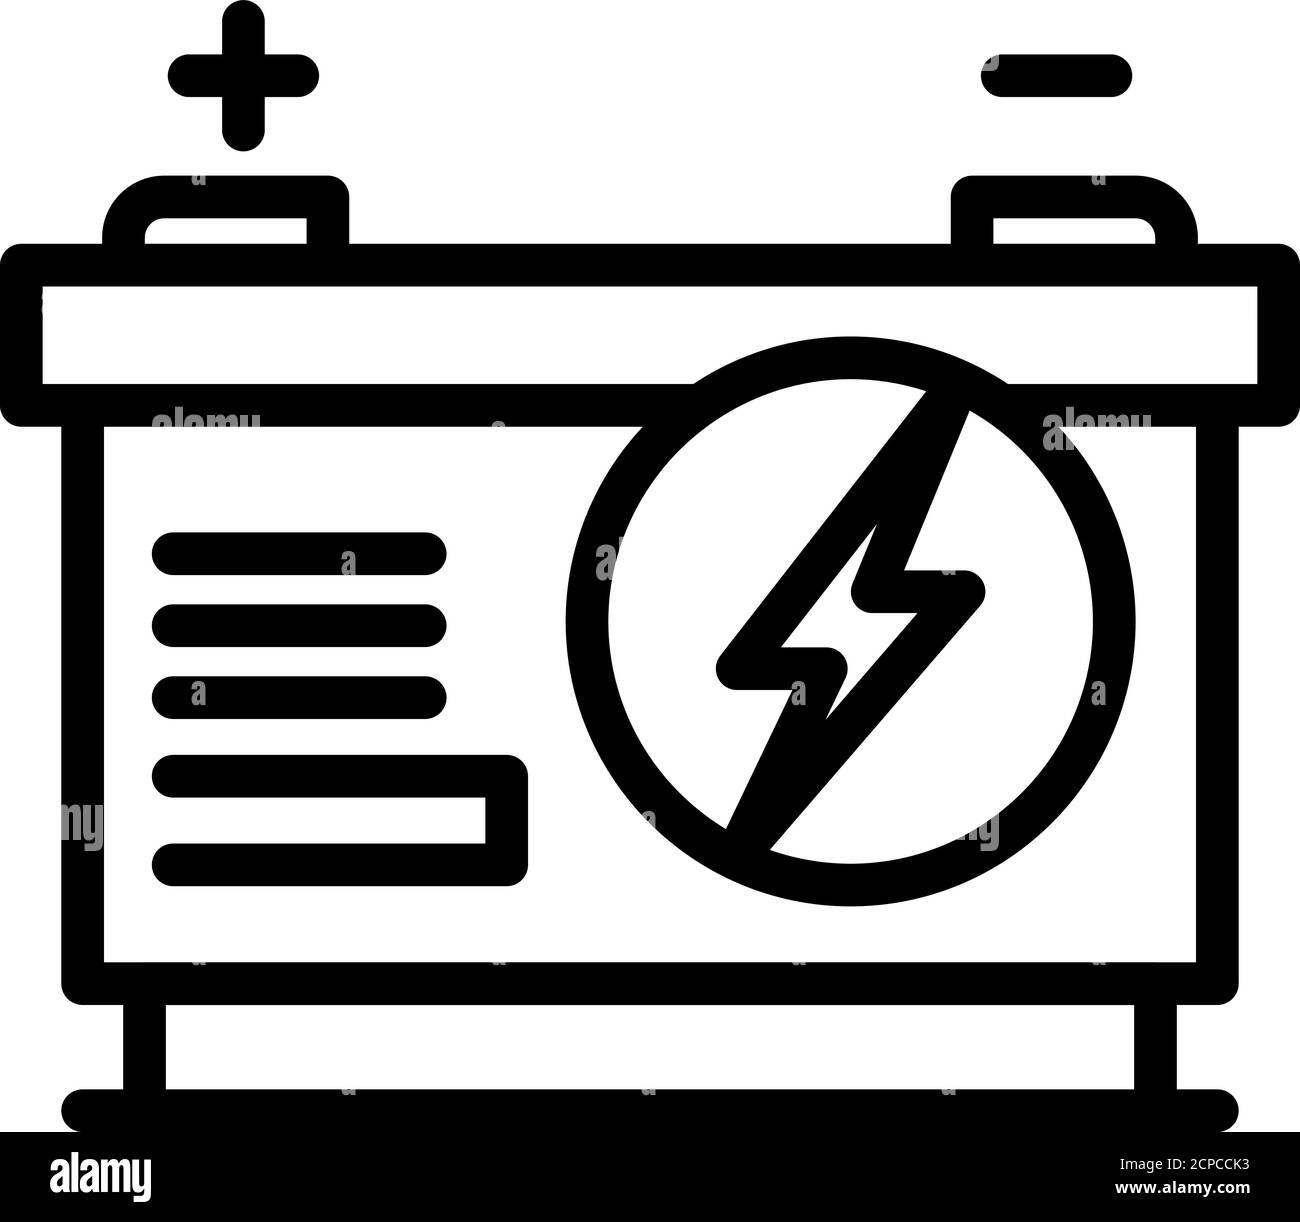 Alkaline car battery icon, outline style Stock Vector